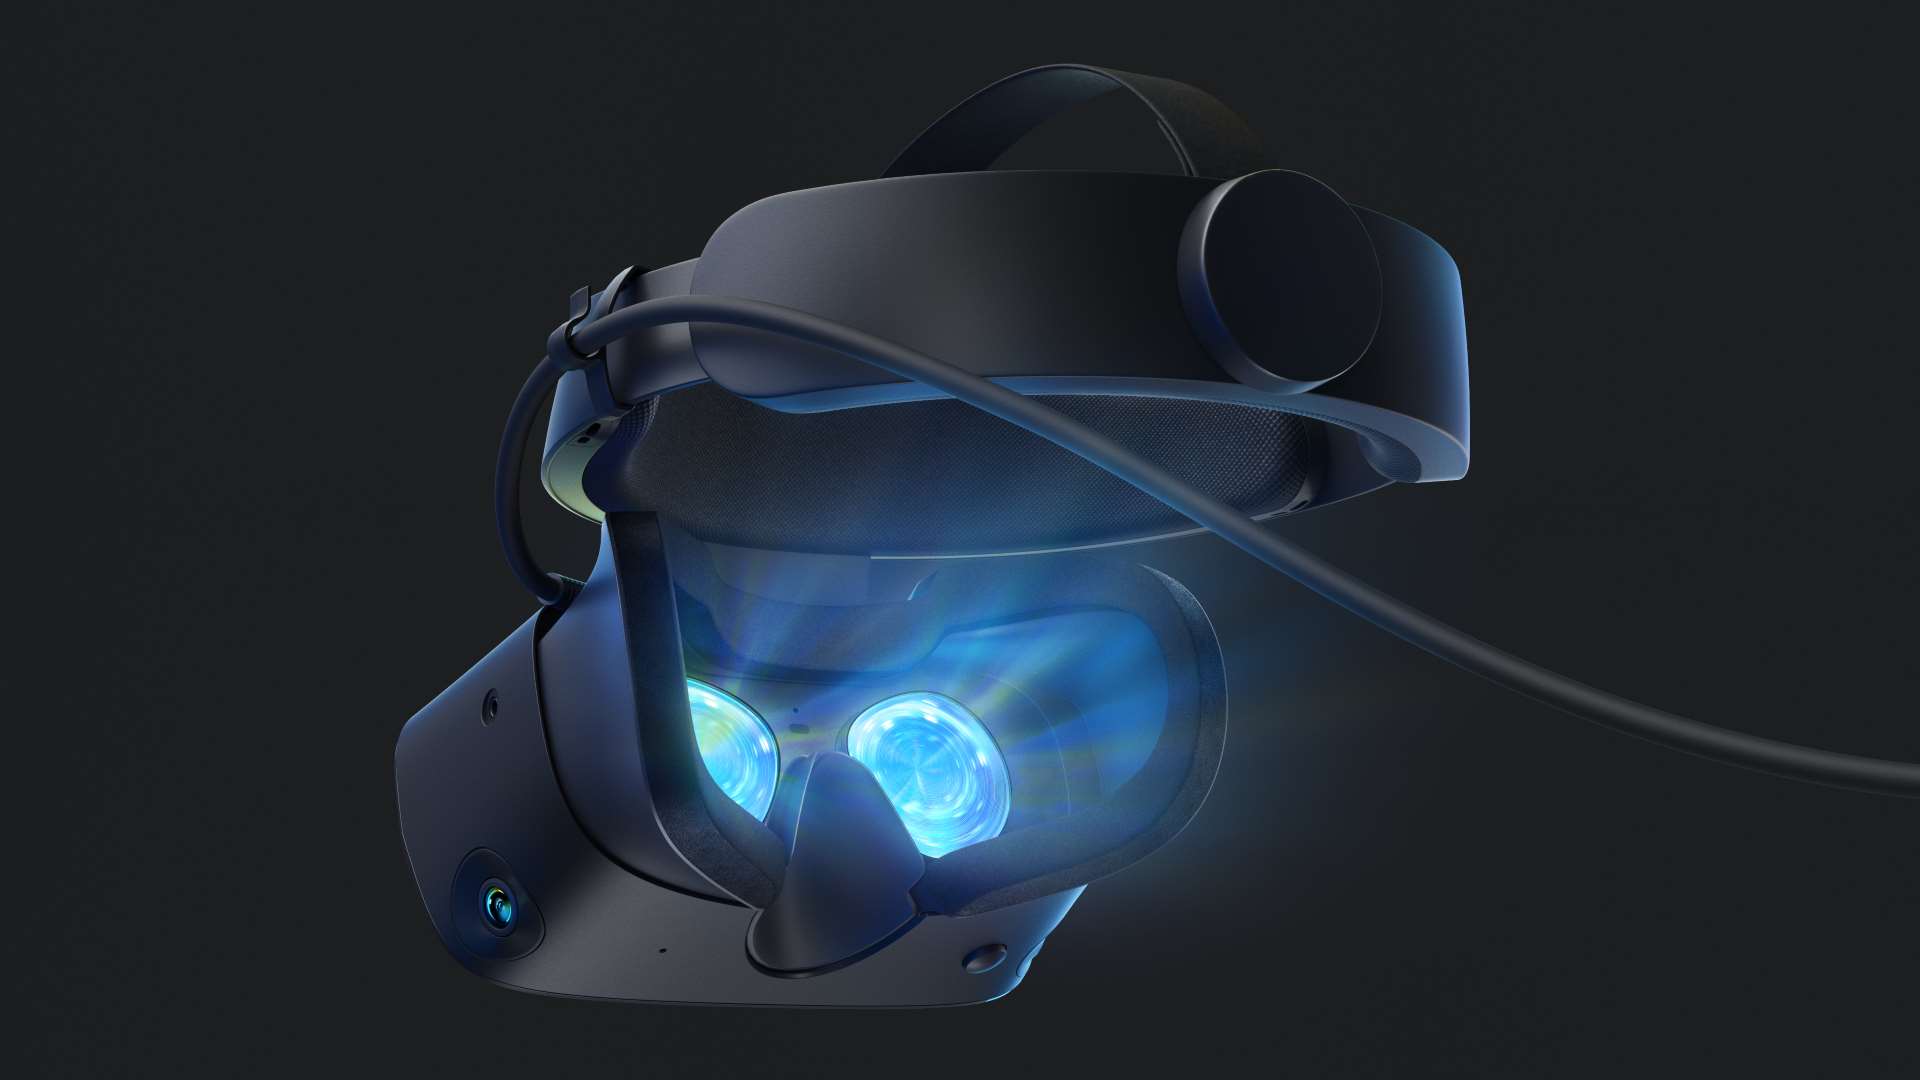 The Oculus Rift S Release Date Is “imminent” With Inside Out Tracking